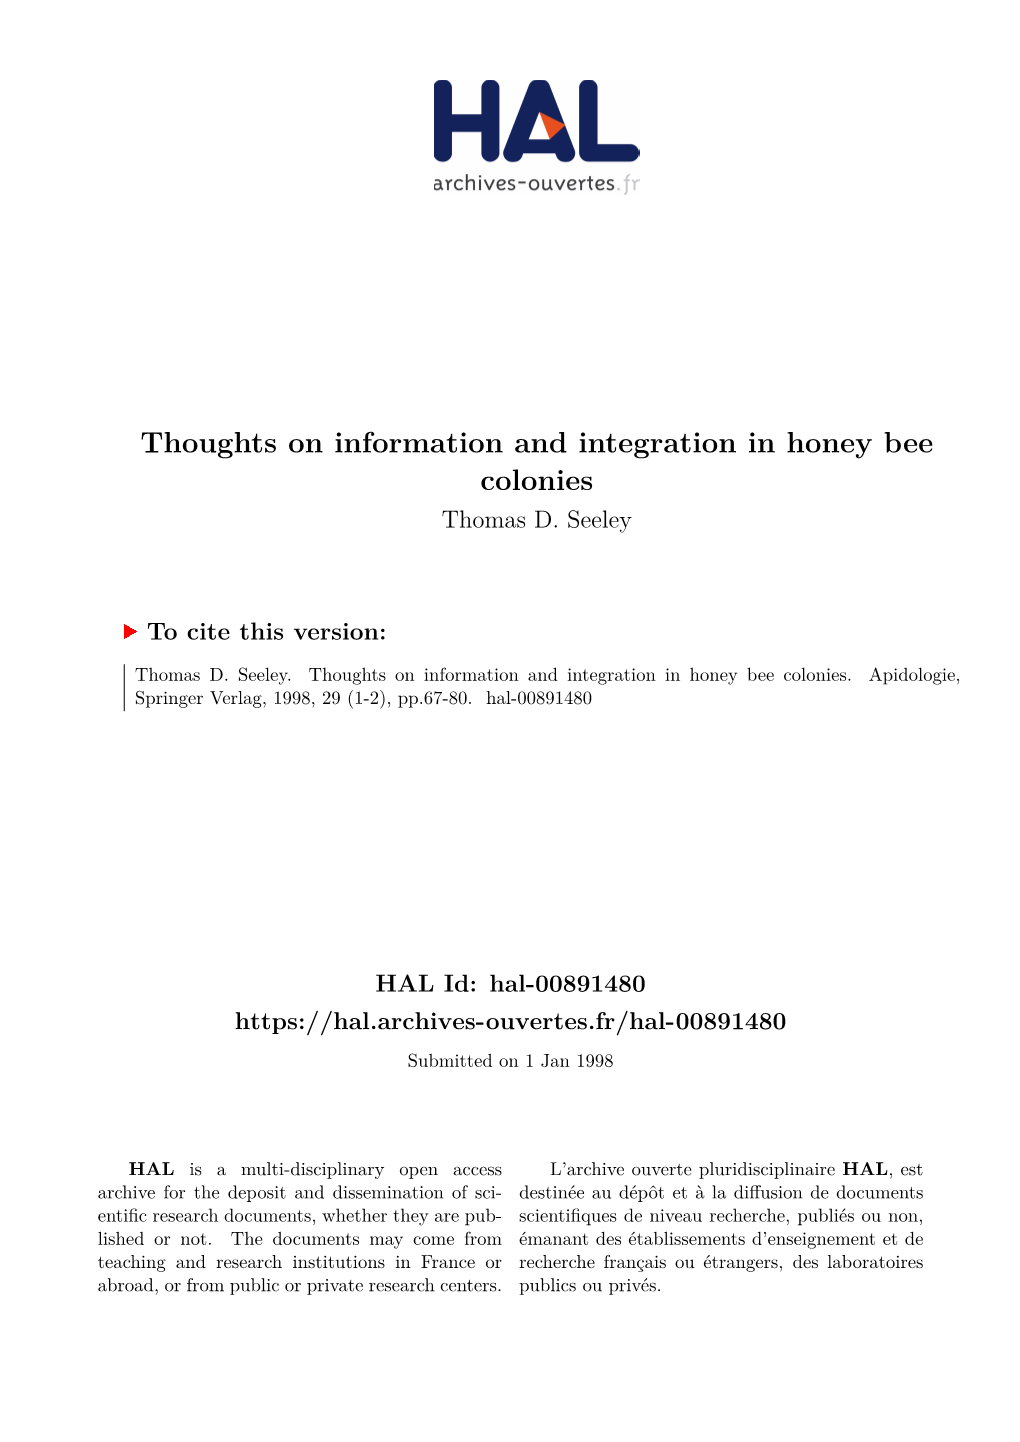 Thoughts on Information and Integration in Honey Bee Colonies Thomas D